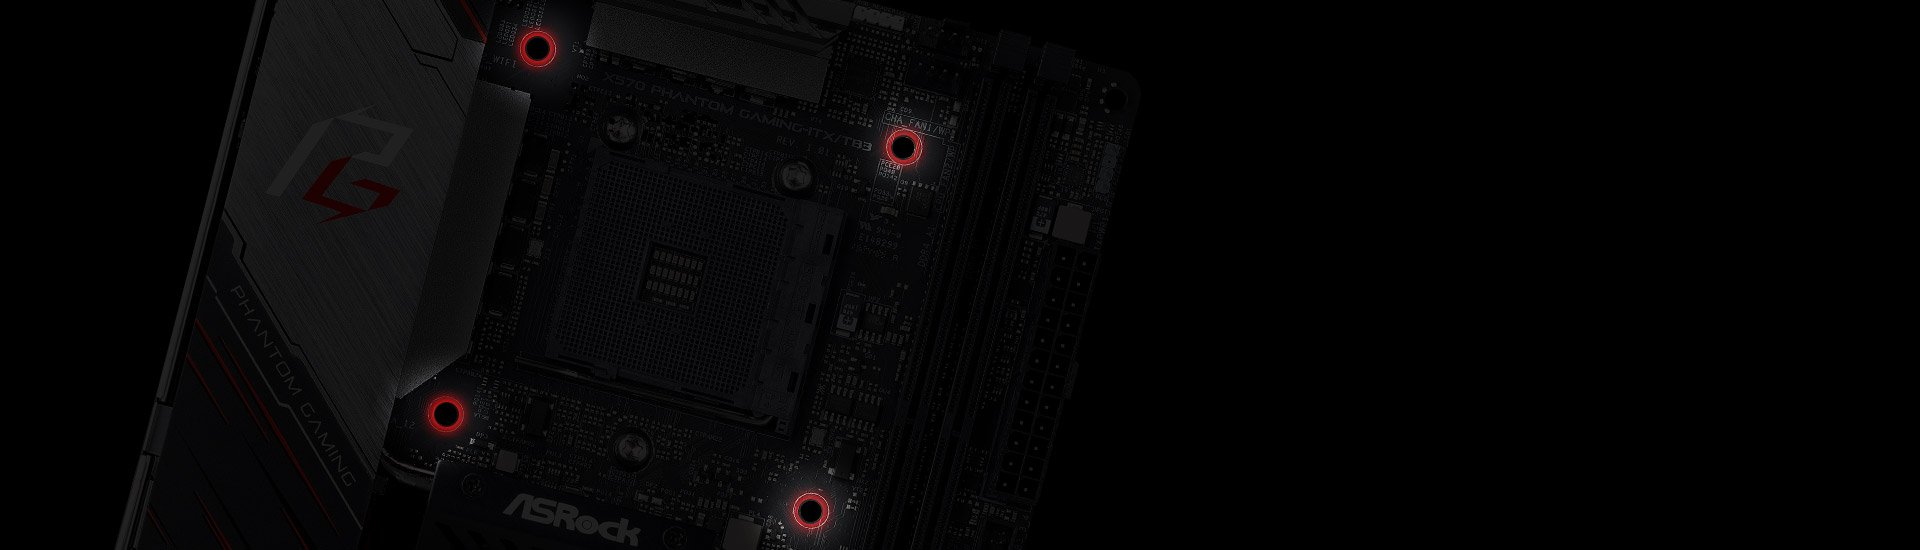 Red Highlights For the Three Mounting Holes on the ASRock X570 Phantom Gaming-ITX/TB3 Motherboard